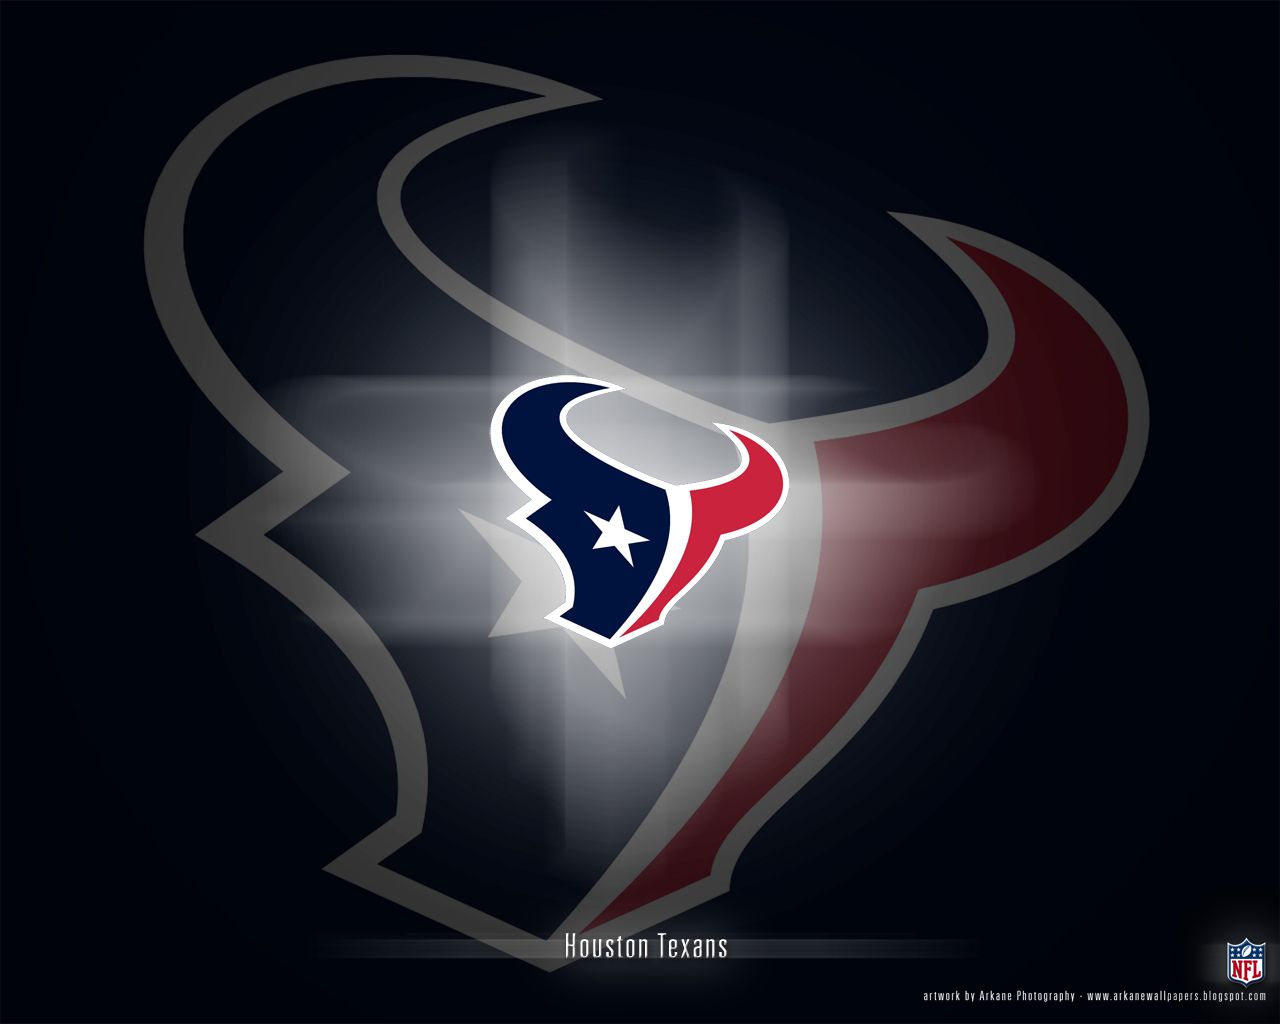 Houston Texans Background Images - WallpaperCafe